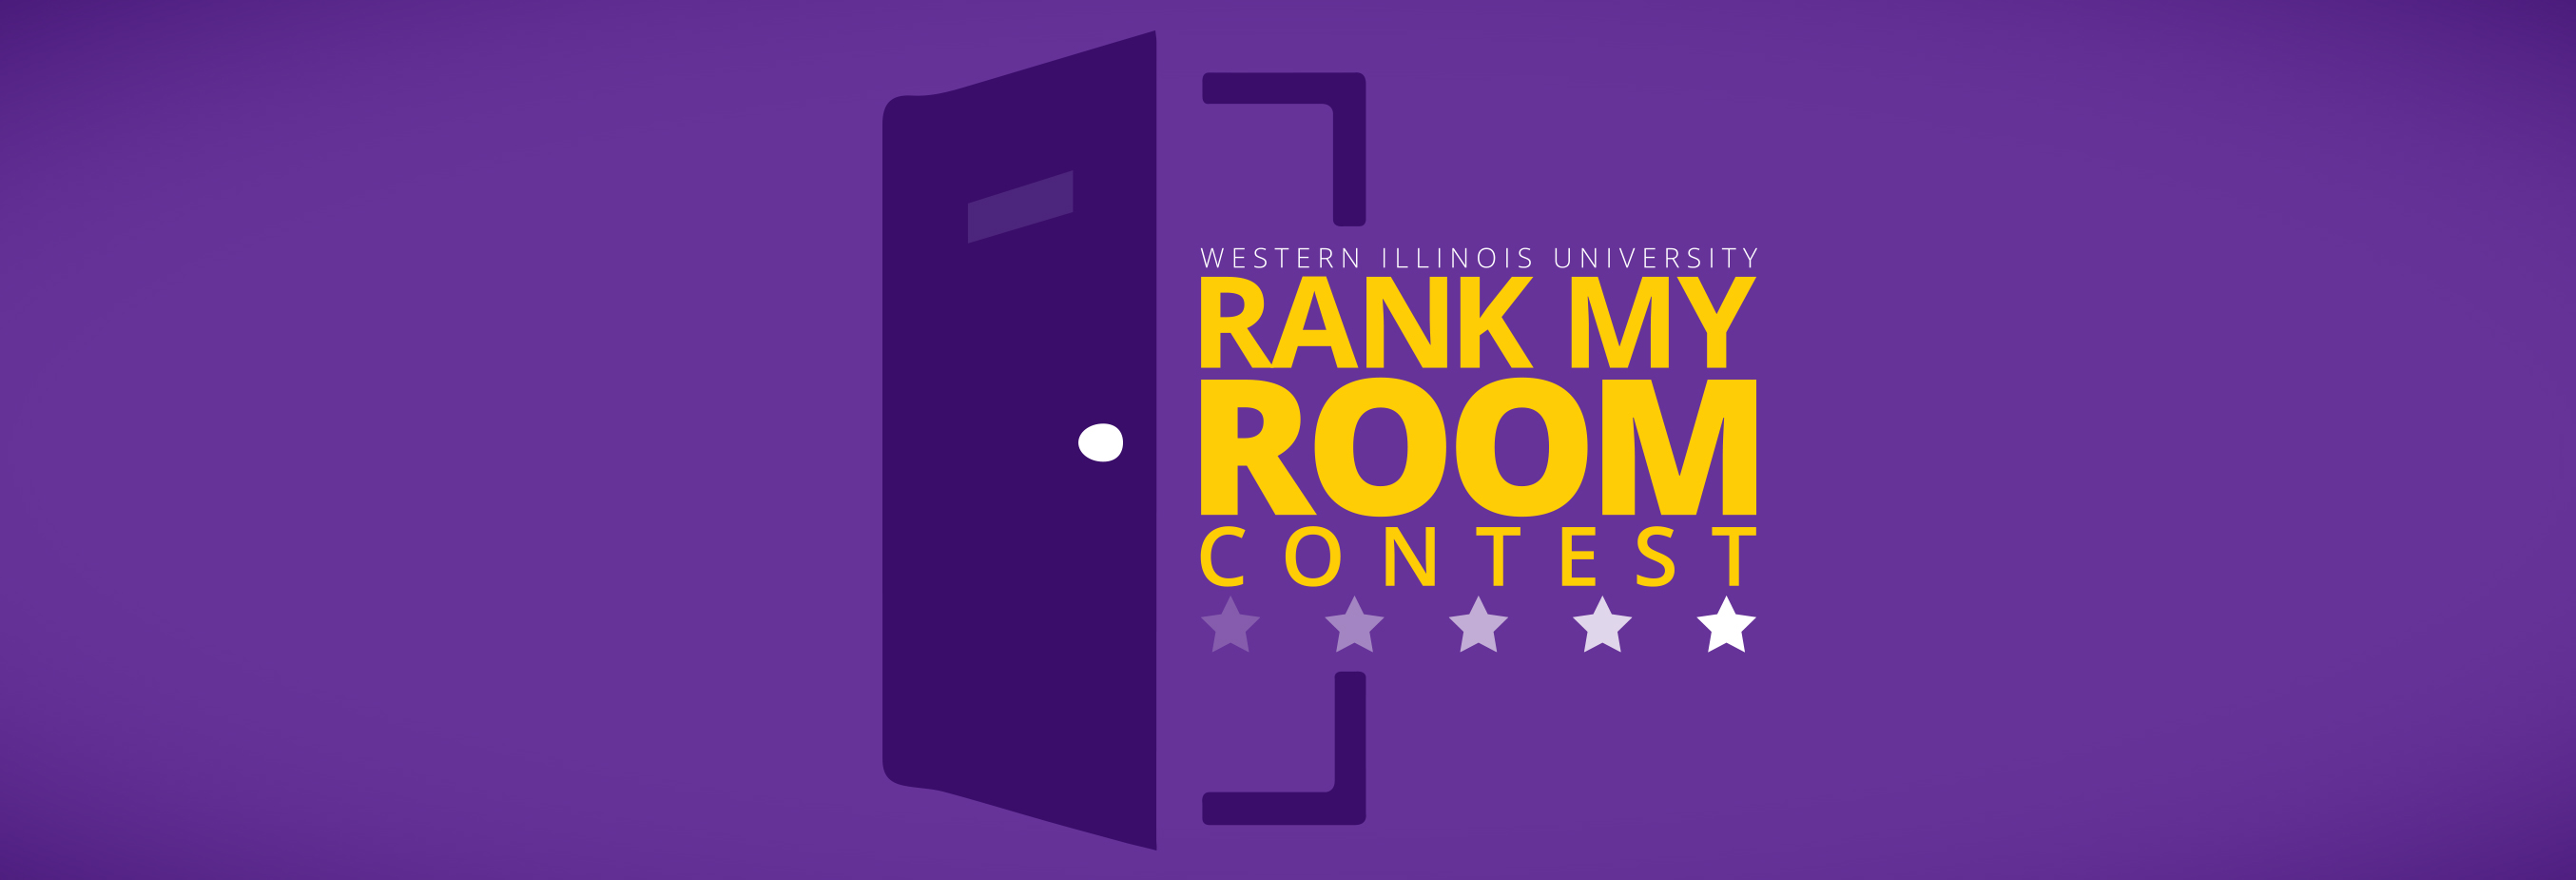 Coolest Room Contest